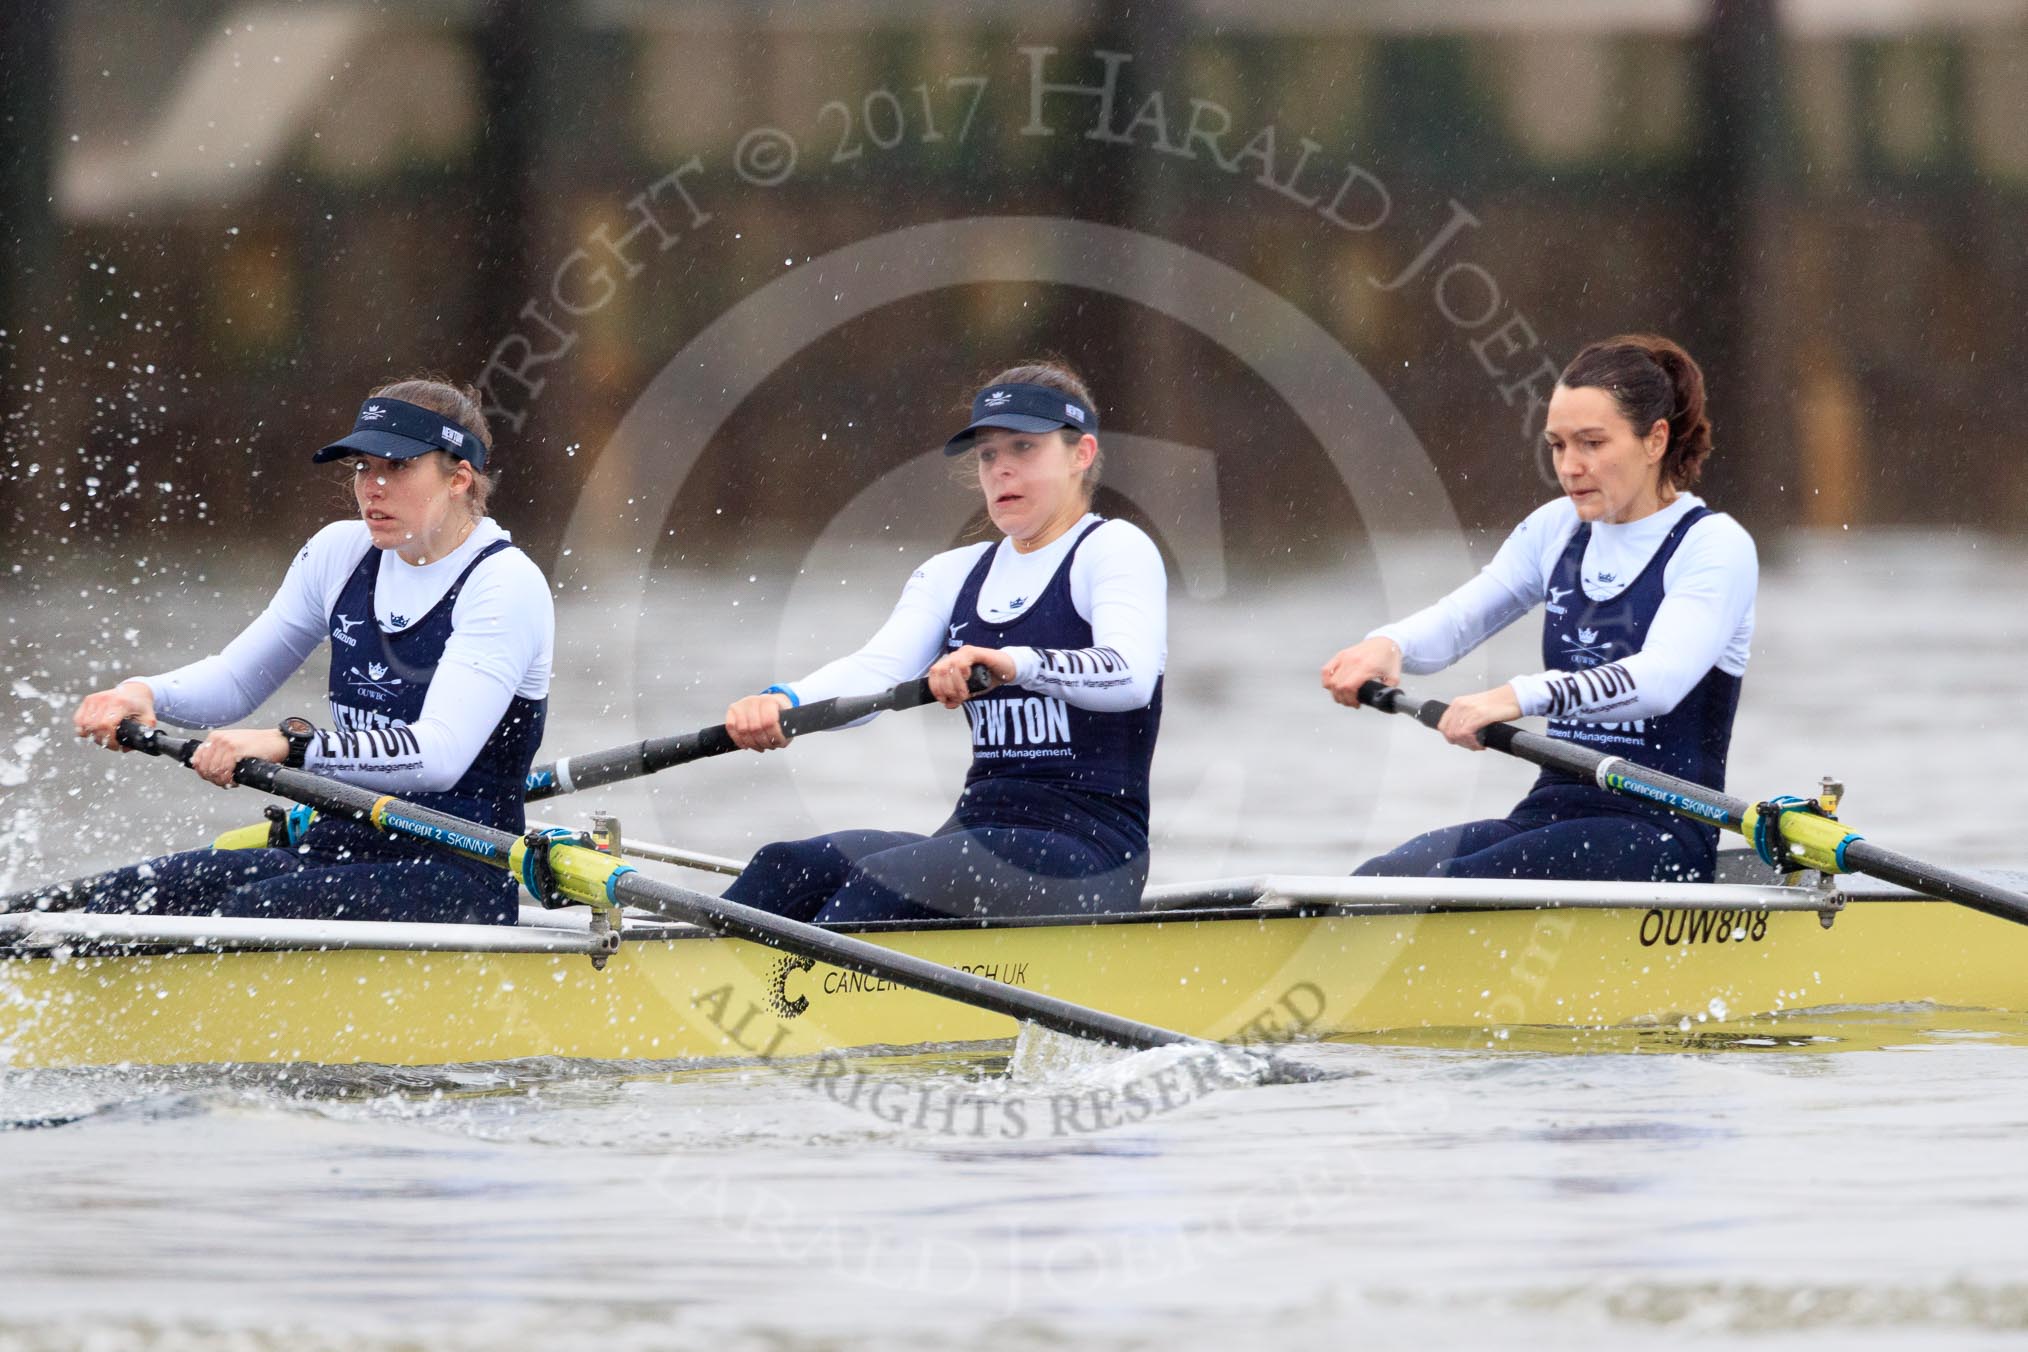 The Boat Race season 2018 - Women's Boat Race Trial Eights (OUWBC, Oxford): "Coursing River" seconds after the race has been started - 3 Stefanie Zekoll, 2 Rachel Anderson, bow Sarah Payne-Riches.
River Thames between Putney Bridge and Mortlake,
London SW15,

United Kingdom,
on 21 January 2018 at 14:27, image #53